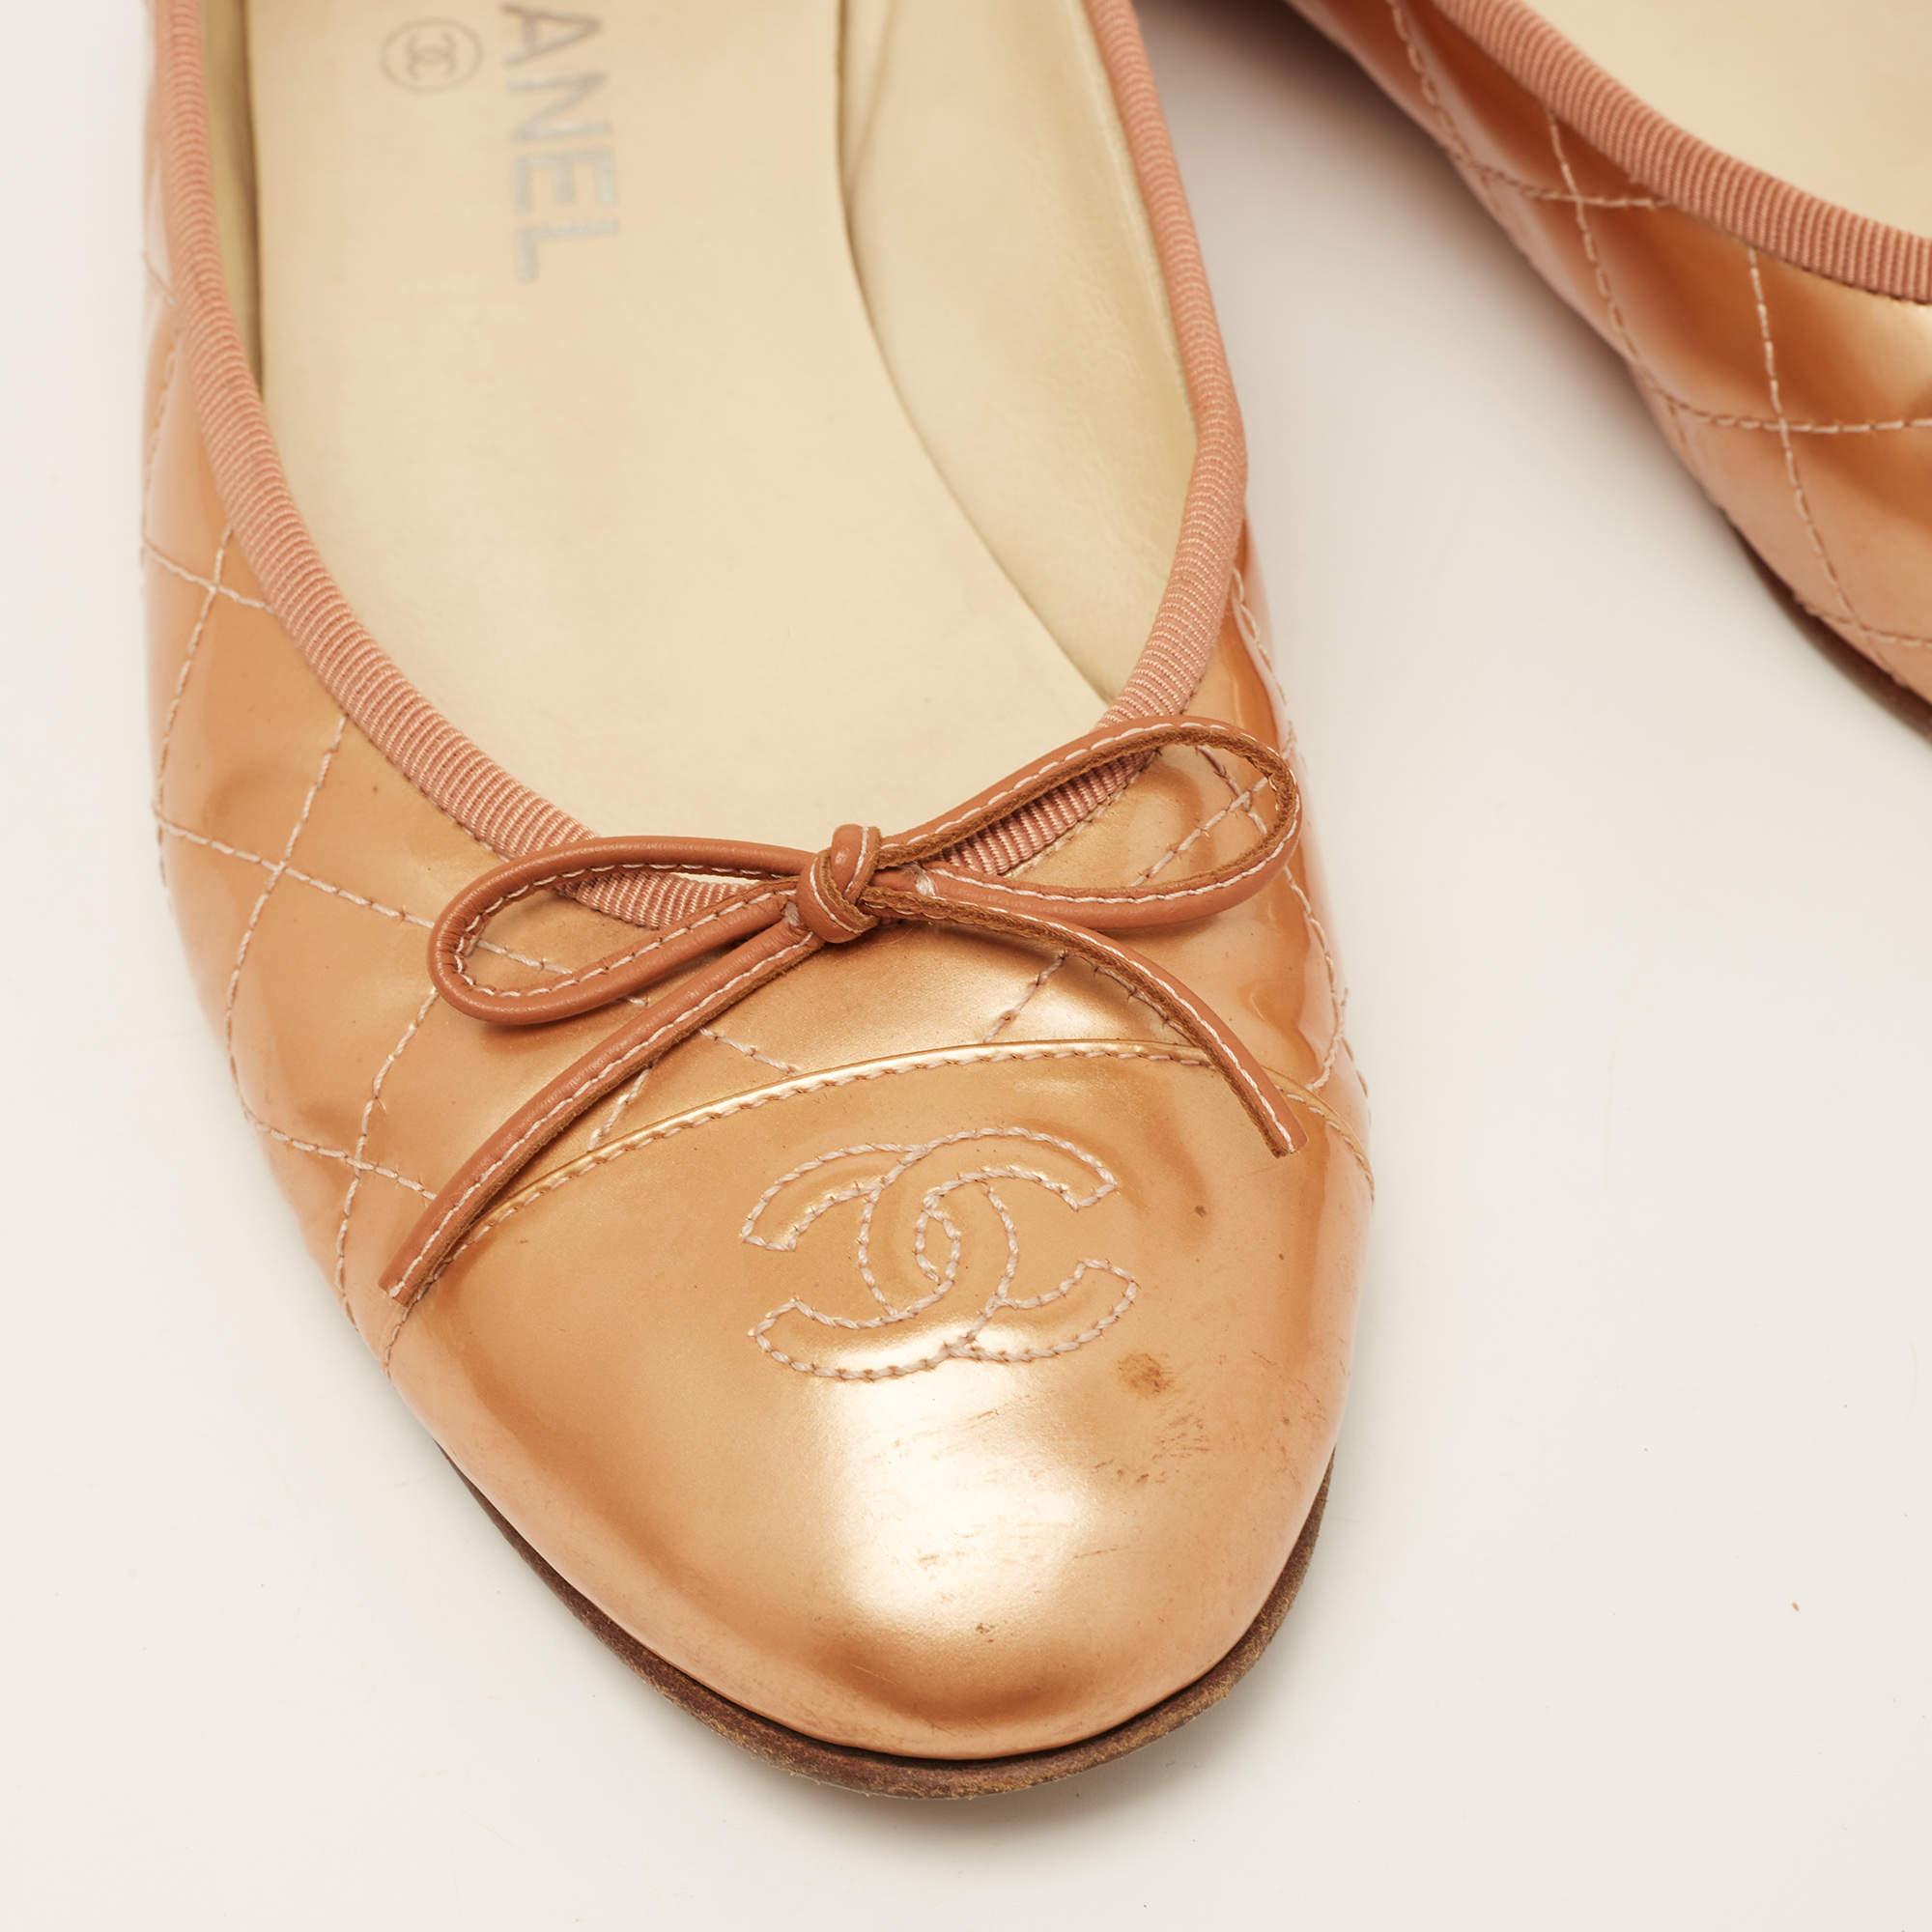 Chanel Metallic Orange Quilted Patent Leather CC Bow Ballet Flats Size 40 1